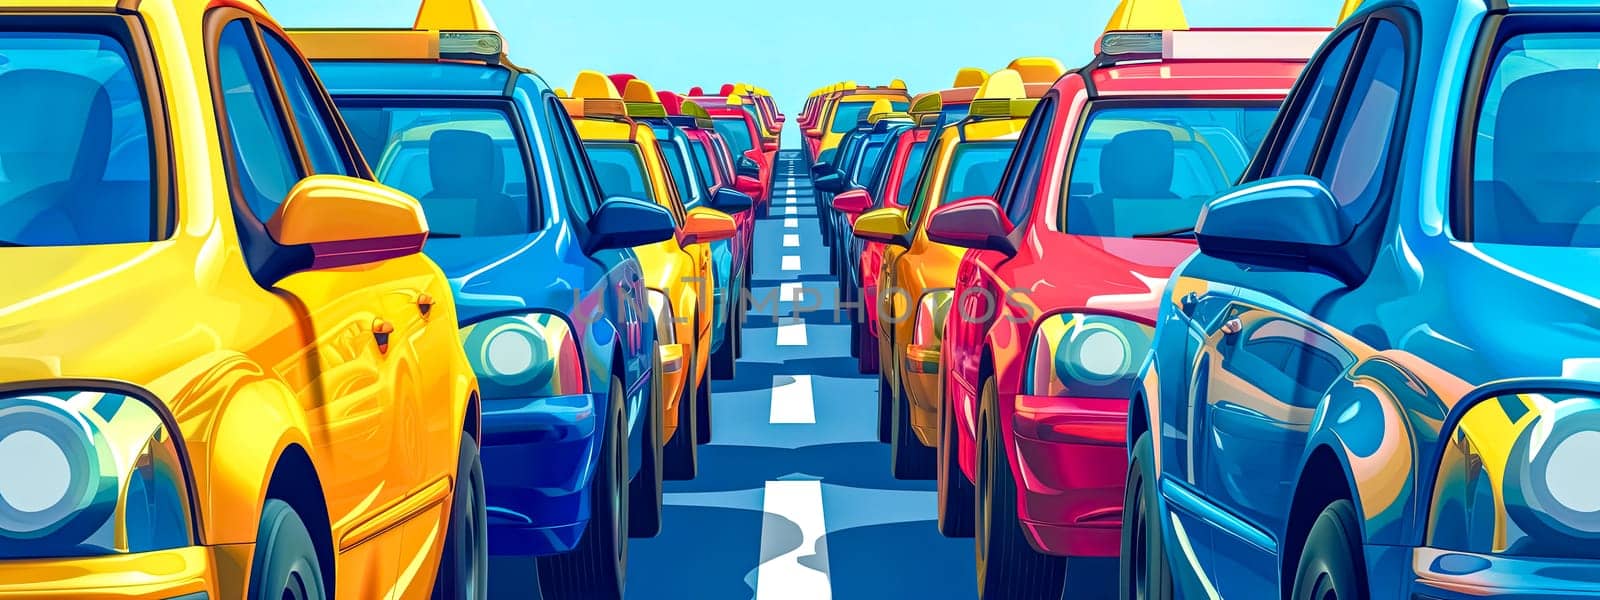 Vibrant Traffic Jam with Colorful Cars Lined Up During Rush Hour in Urban Commute by Edophoto